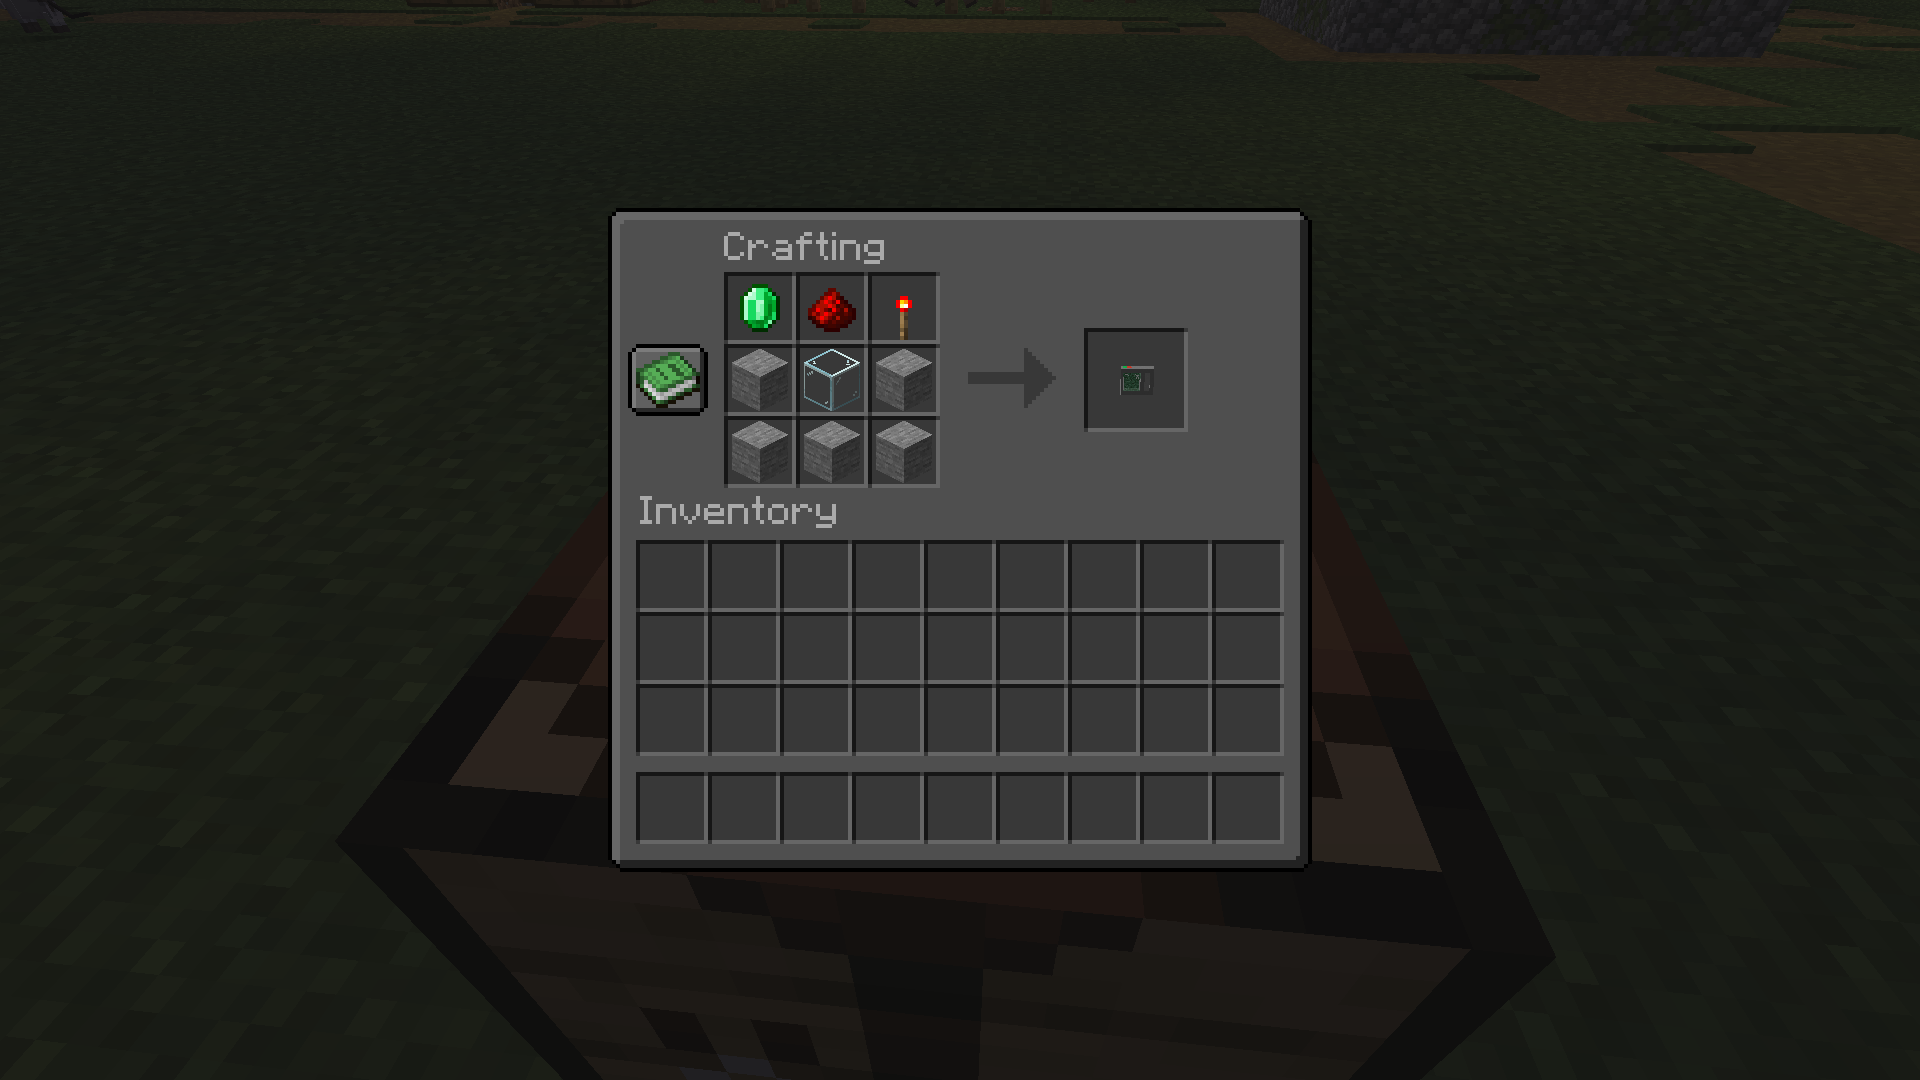 Tablet Recipe five stone, one redstone dust, one redstone torch, one emerald, one glass block